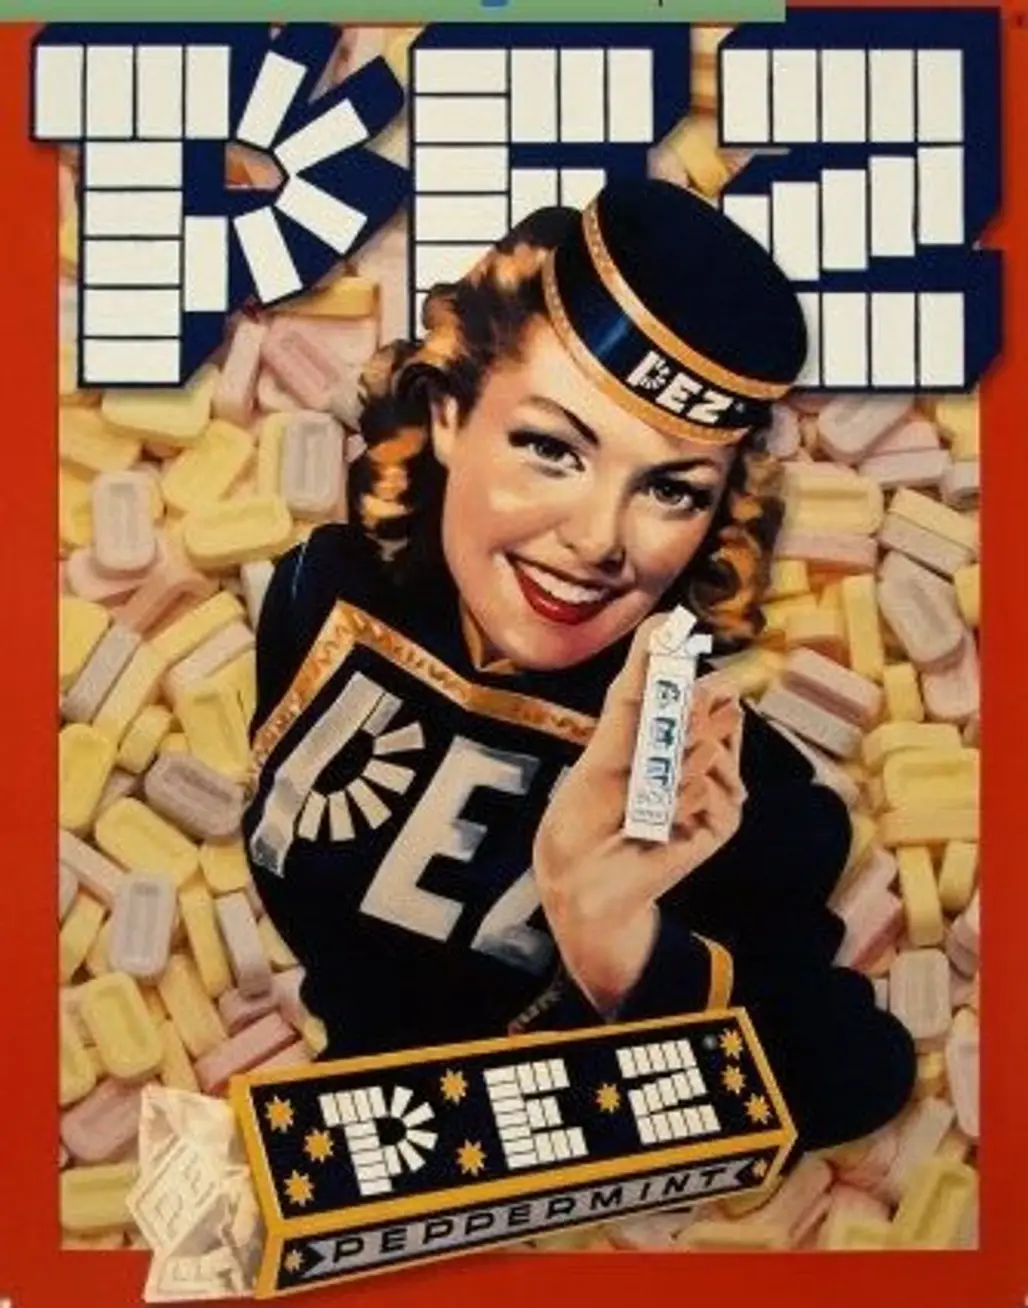 1930s Vintage Ad for Pez Candy